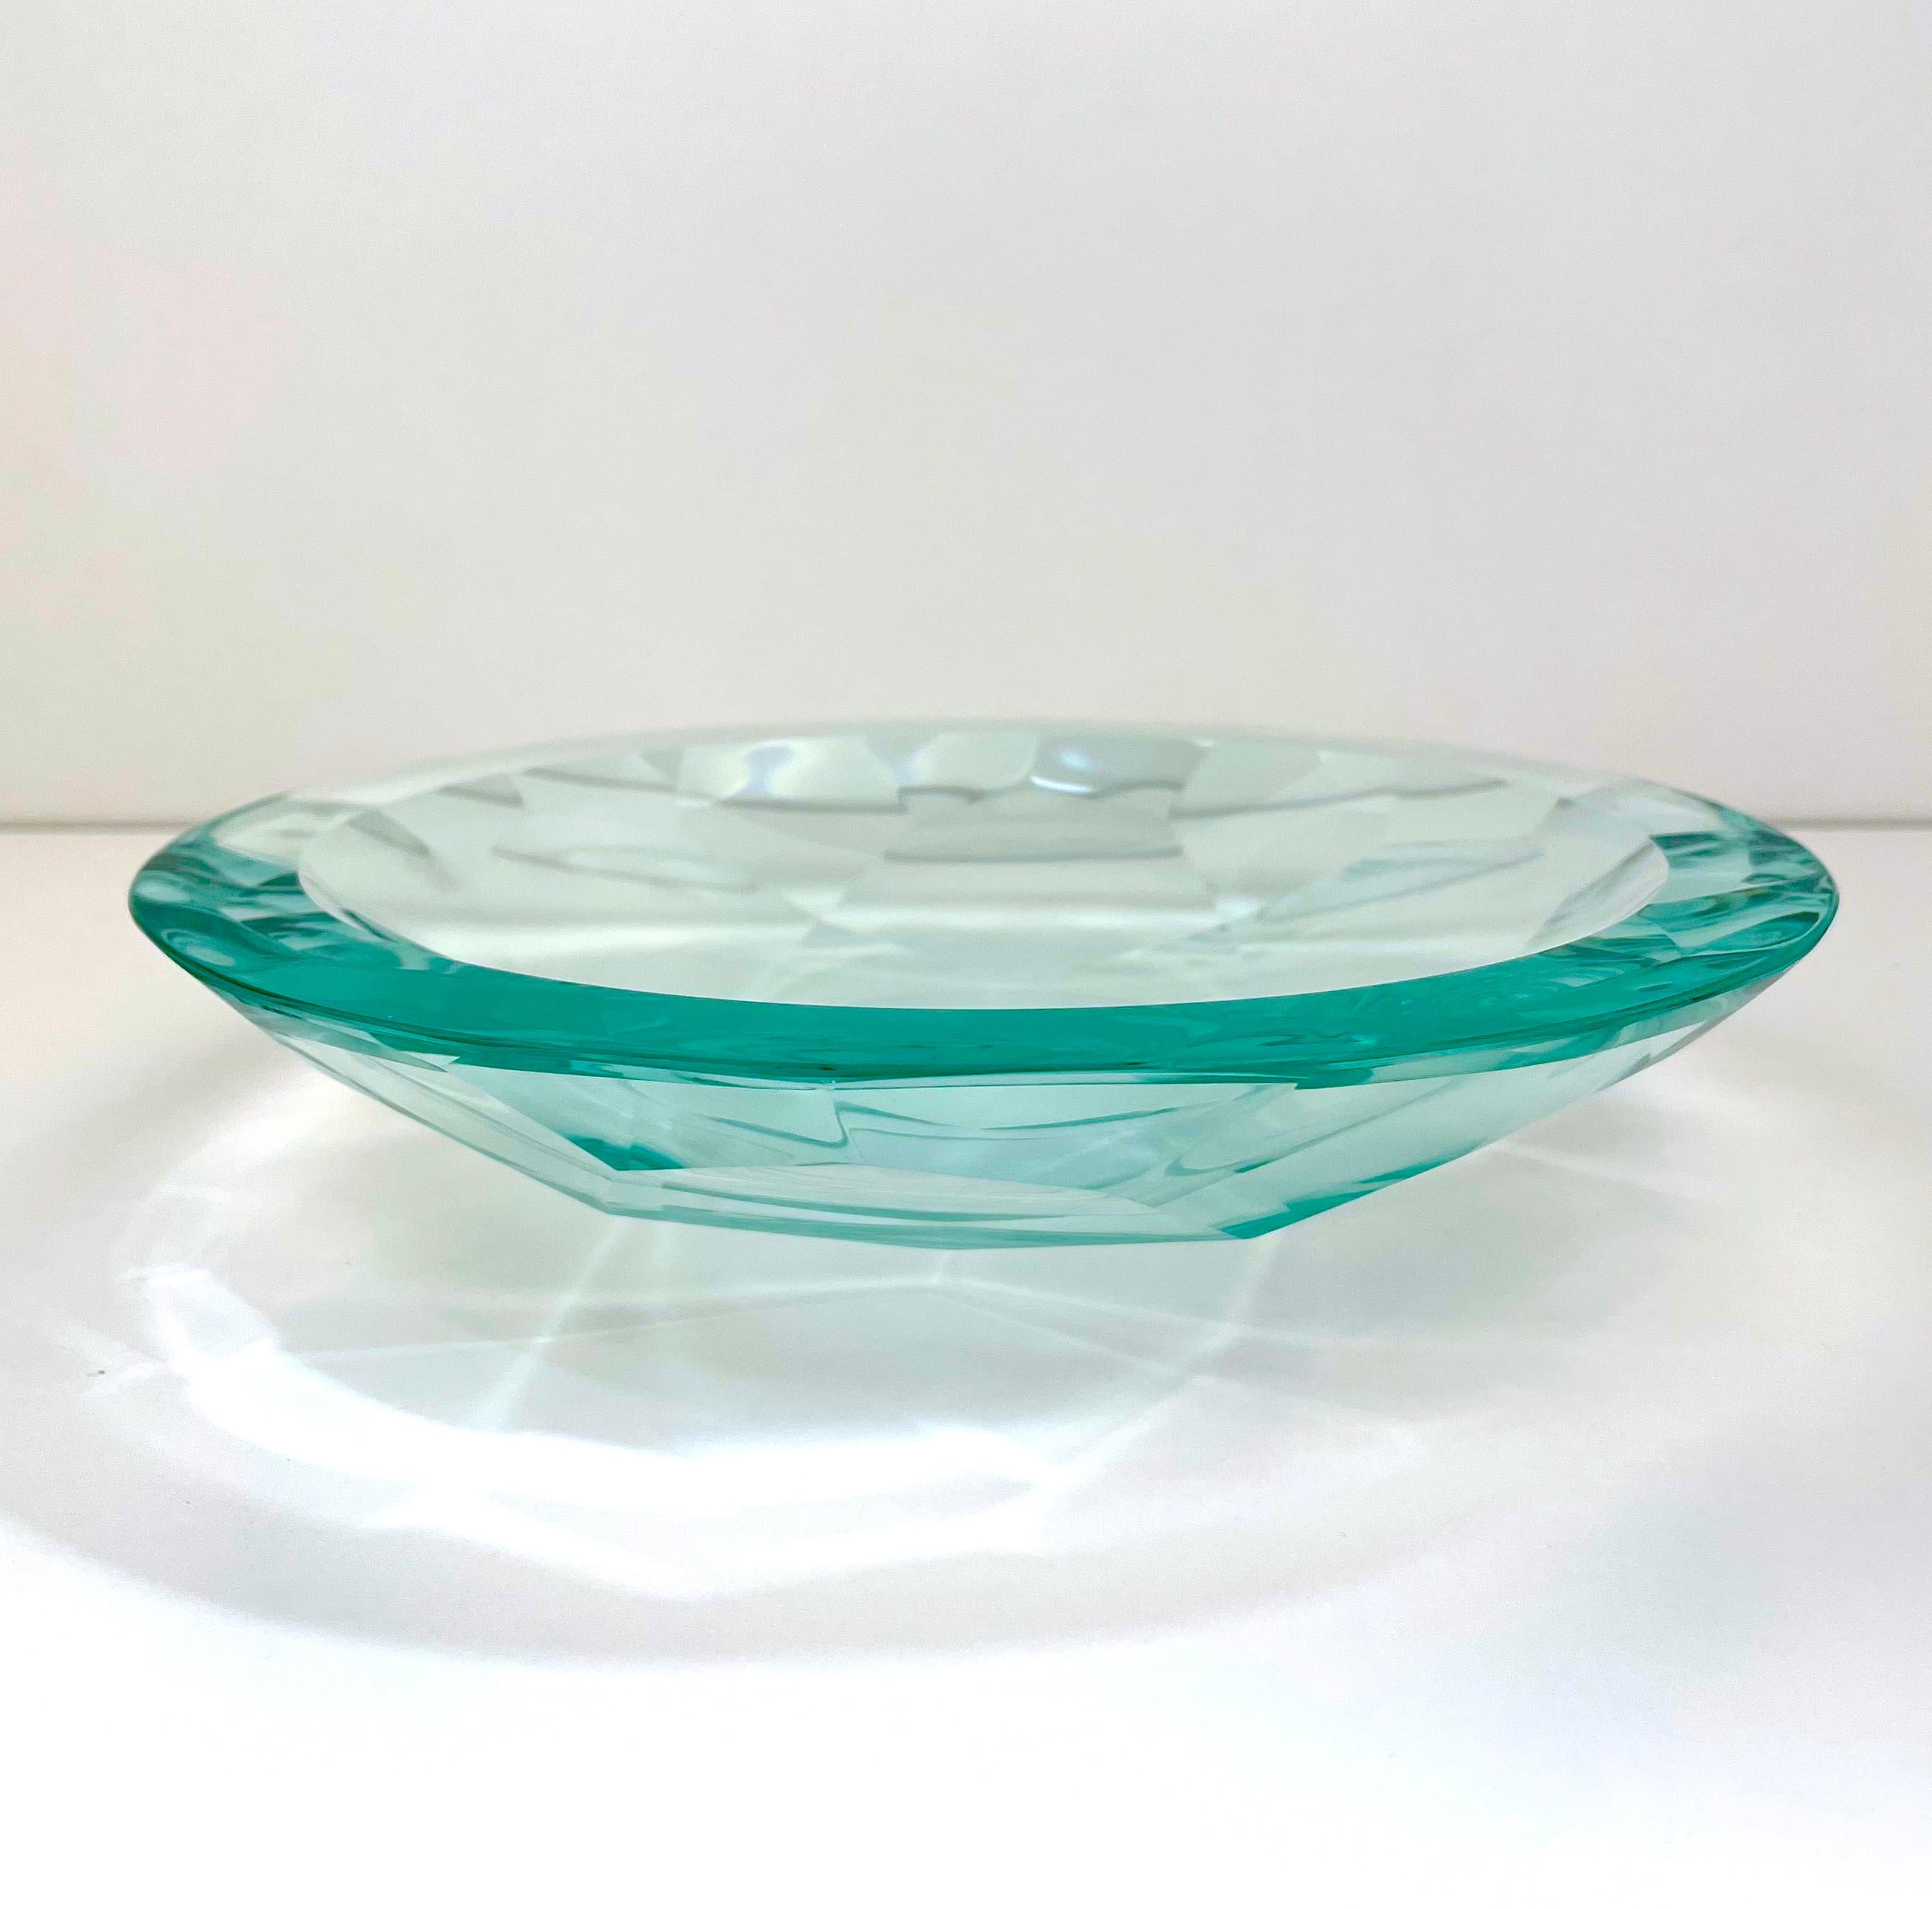 Hand-Crafted Glass Bowl with Geometric Flower Pattern entirely Handmade by Ghiró Studio For Sale